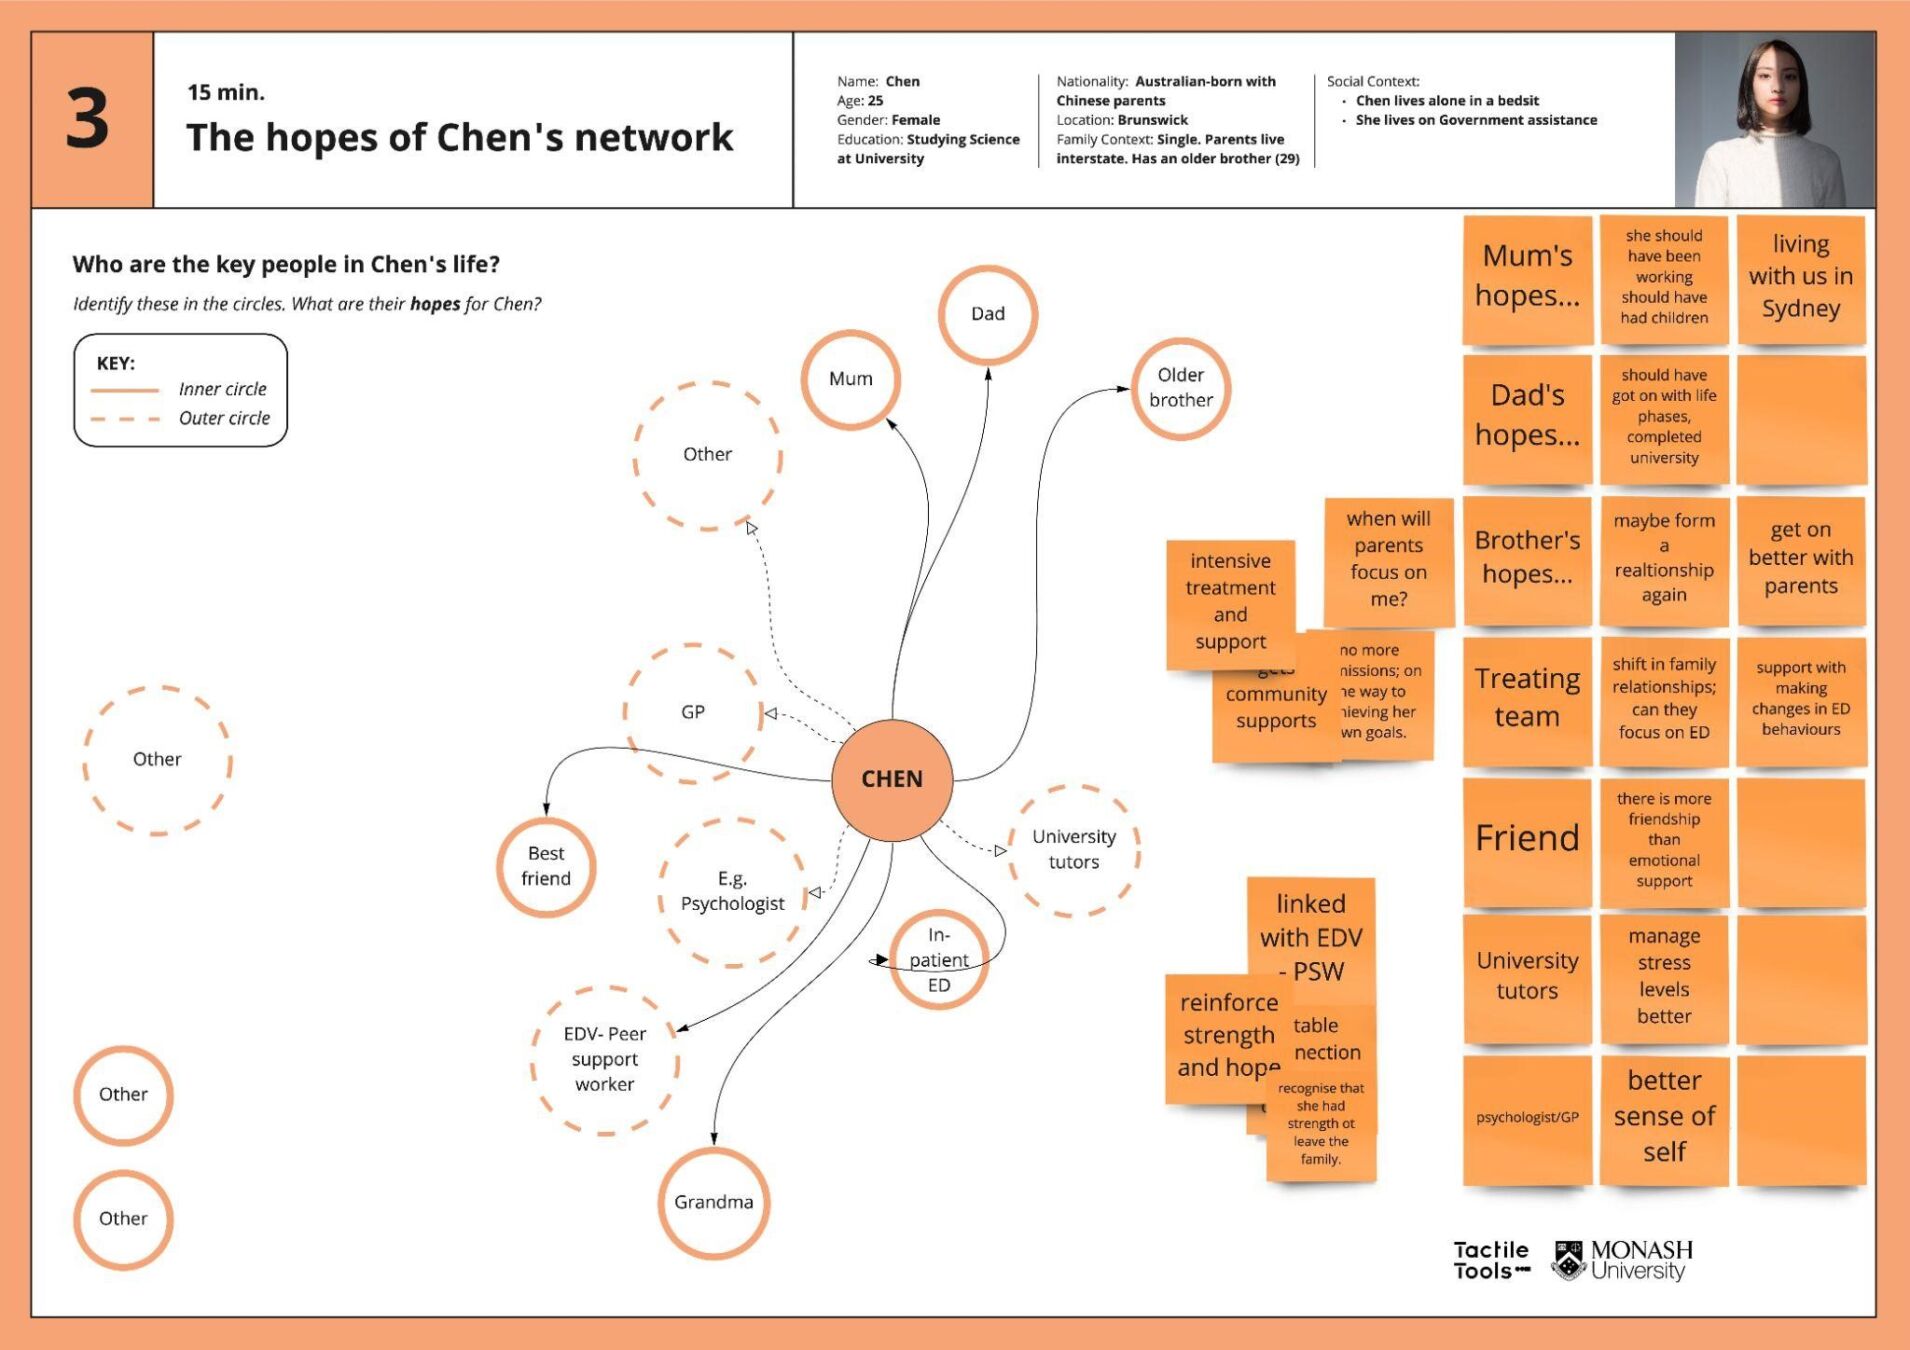 Image 2: A Miro board from the Model of Care workshop in which participants collectively mapped the network of the persona Chen.